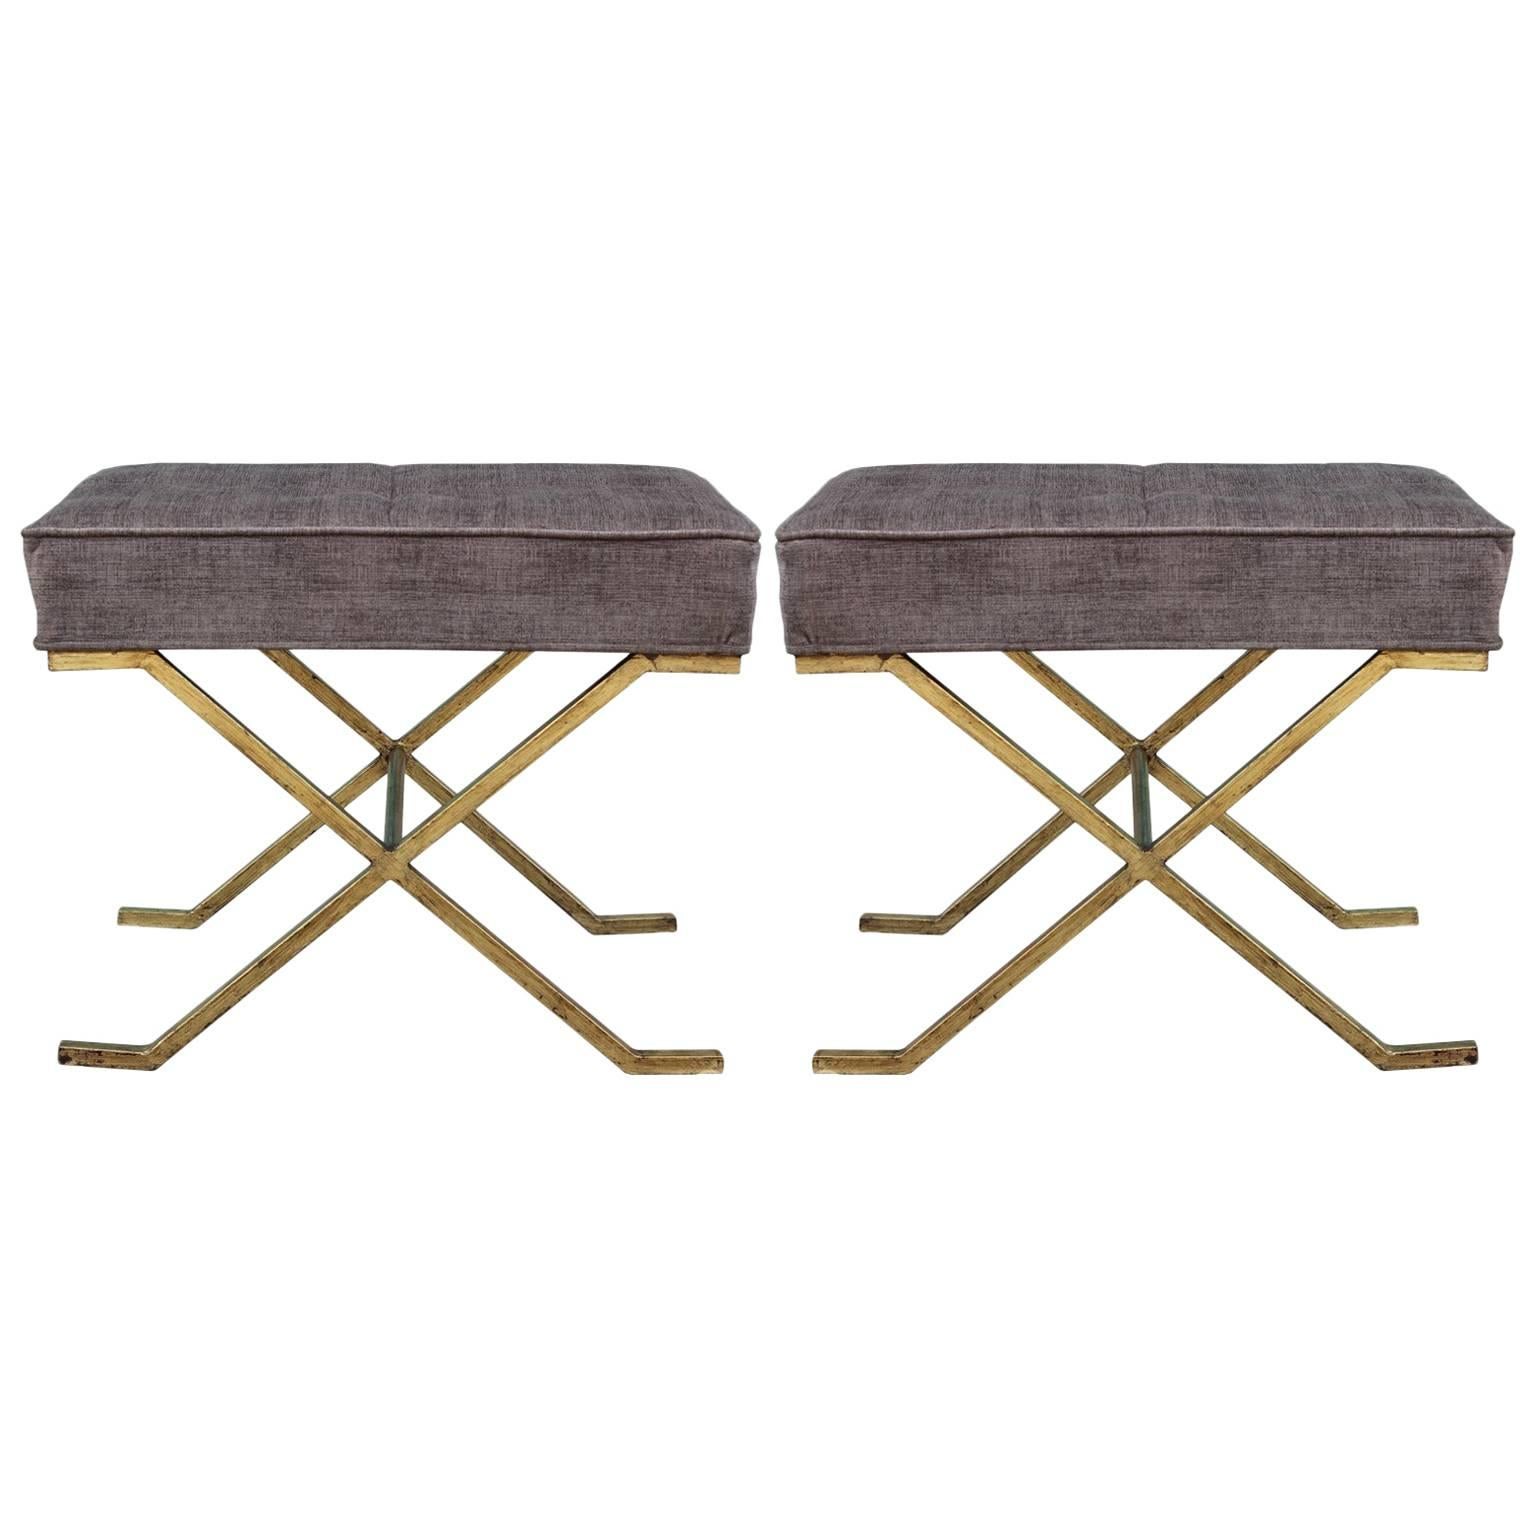 Pair of Modern Gold Leafed Stools or Ottomans in Tufted Grey Upholstery 